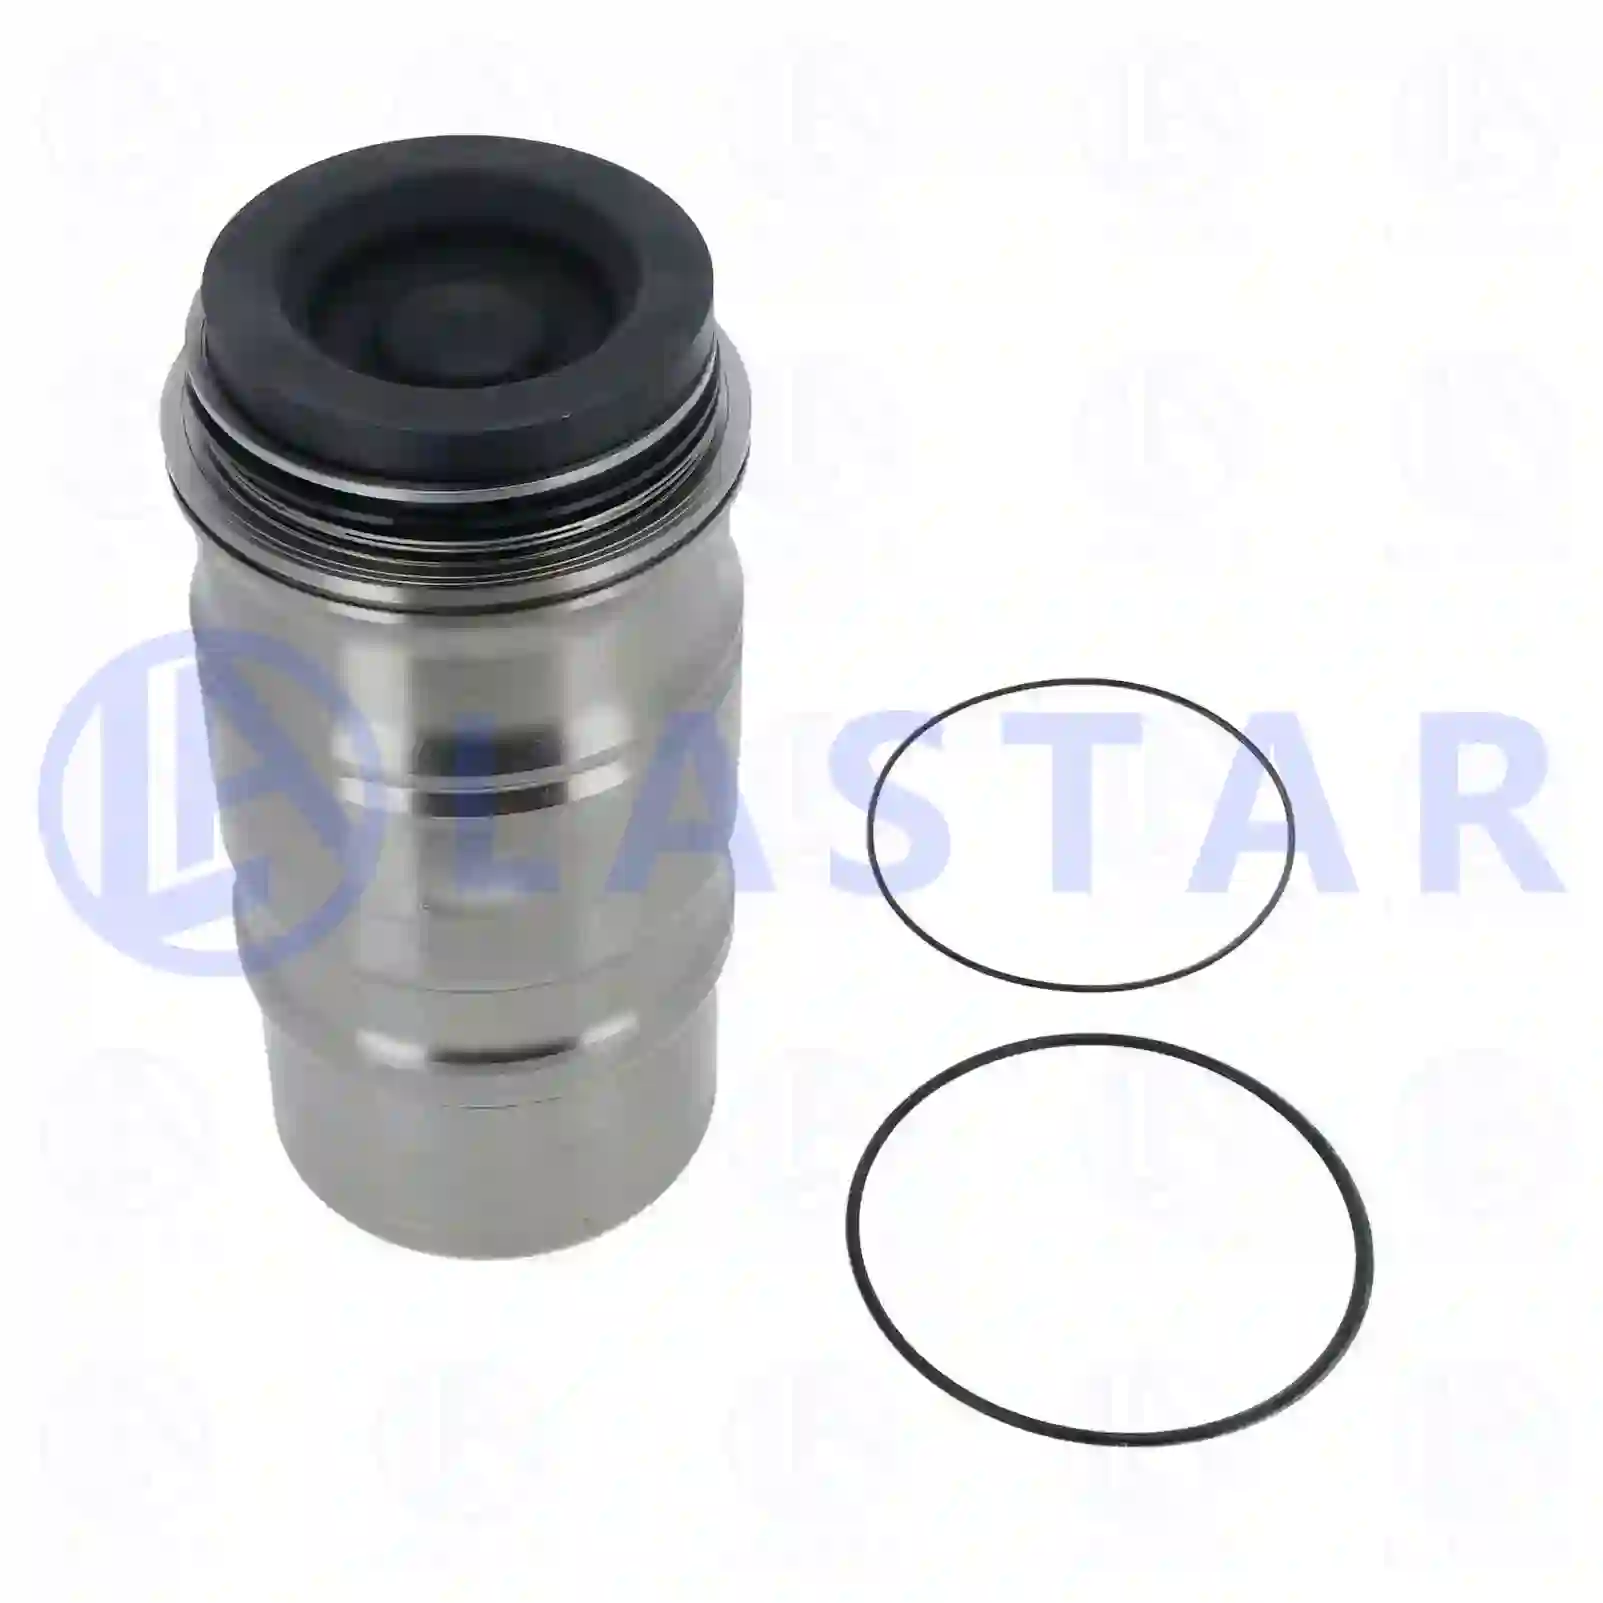 Piston with liner, 77704763, 1549774, 1773931, 1791991 ||  77704763 Lastar Spare Part | Truck Spare Parts, Auotomotive Spare Parts Piston with liner, 77704763, 1549774, 1773931, 1791991 ||  77704763 Lastar Spare Part | Truck Spare Parts, Auotomotive Spare Parts